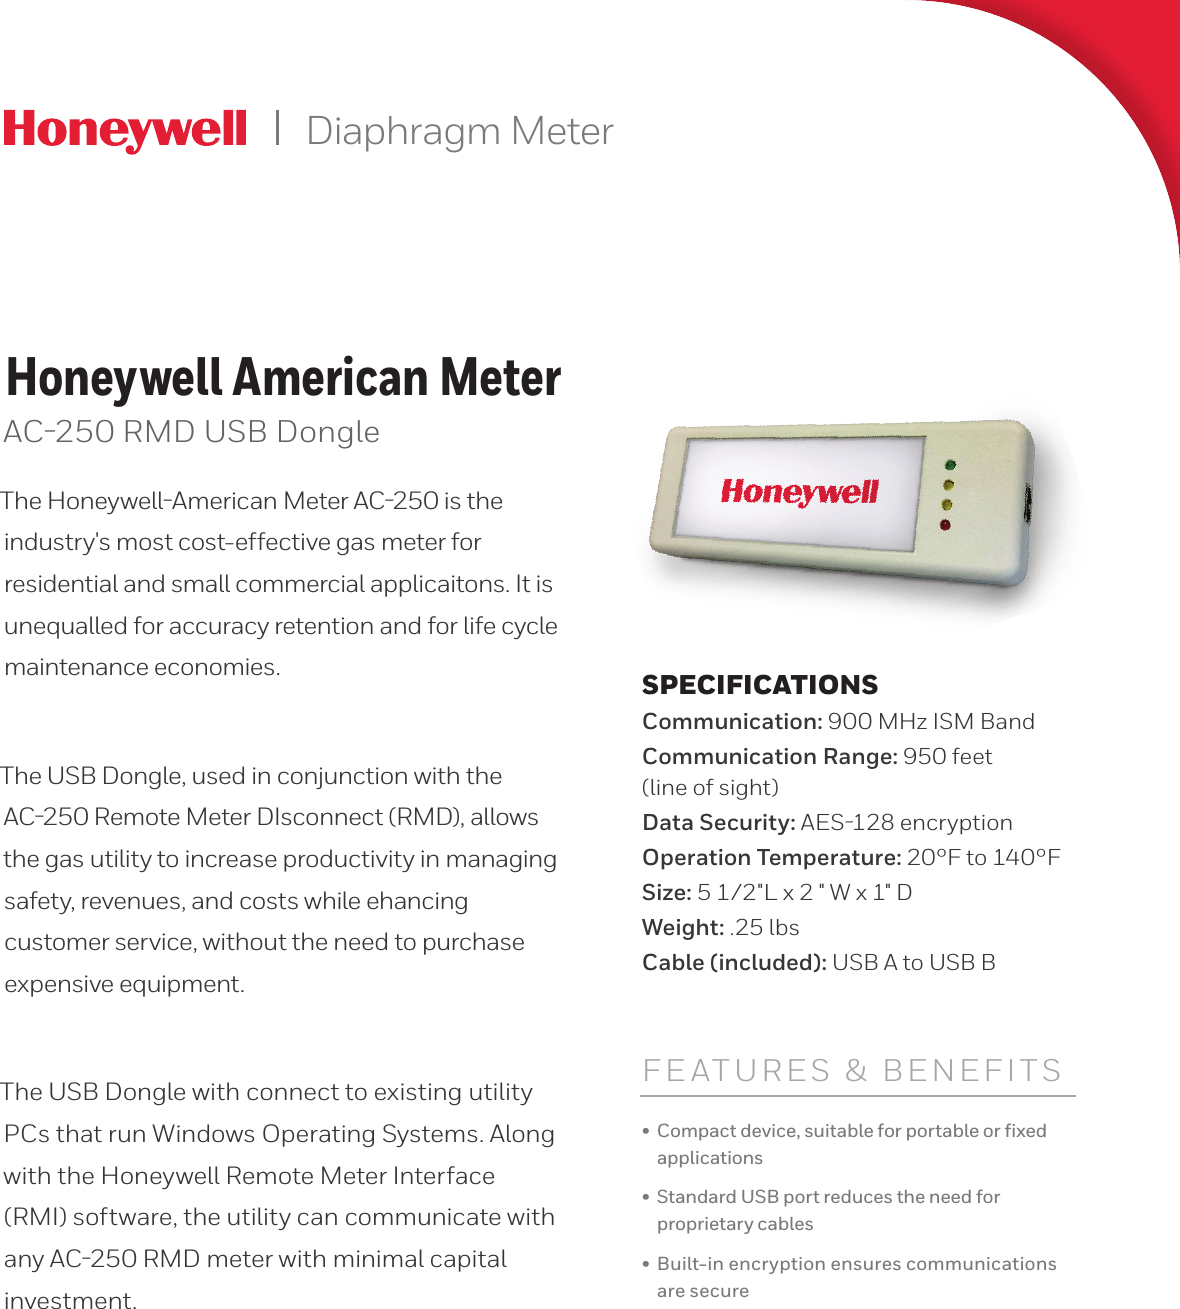 Diaphragm MeterHoneywell American MeterAC250 RMD USB DongleThe HoneywellAmerican Meter AC250 is the industry&apos;s most cost-effective gas meter for residential and small commercial applicaitons. It is unequalled for accuracy retention and for life cycle maintenance economies. The USB Dongle, used in conjunction with the AC250 Remote Meter DIsconnect (RMD), allows the gas utility to increase productivity in managing safety, revenues, and costs while ehancing customer service, without the need to purchase expensive equipment.The USB Dongle with connect to existing utility PCs that run Windows Operating Systems. Along with the Honeywell Remote Meter Interface (RMI) software, the utility can communicate with any AC250 RMD meter with minimal capital investment.FEATURES &amp; BENEFITS•  Compact device, suitable for portable or ﬁxed applications•  Standard USB port reduces the need for proprietary cables•  Built-in encryption ensures communications are secureSPECIFICATIONSCommunication: 900 MHz ISM BandCommunication Range: 950 feet (line of sight)Data Security: AES128 encryptionOperation Temperature: 20°F to 140°FSize: 5 1/2&quot;L x 2 &quot; W x 1&quot; DWeight: .25 lbsCable (included): USB A to USB B